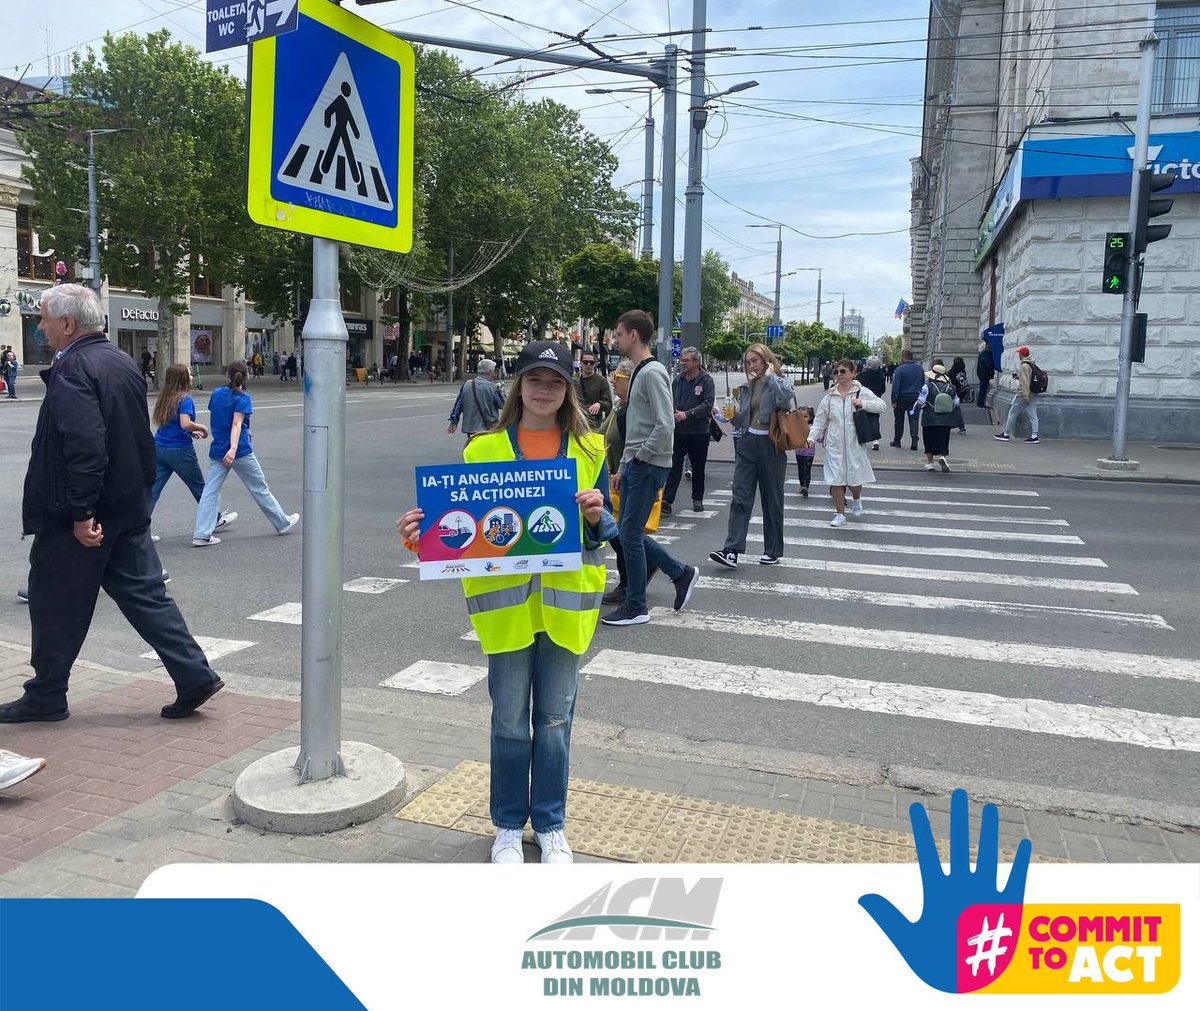 🚶‍♀️🚶Walking is healthy, sustainable, equitable, and free. When safe, it is an answer to many of society’s ills.
#CommitToAct #MakeItSafe #RoadSafetyWeek
@fia
@FIARegionI
@FIAFdn
@EASSTransport
@RoadSafetyNGOs
@WHOMoldova
@WHO
@UNICEFMoldova
@UNICEF